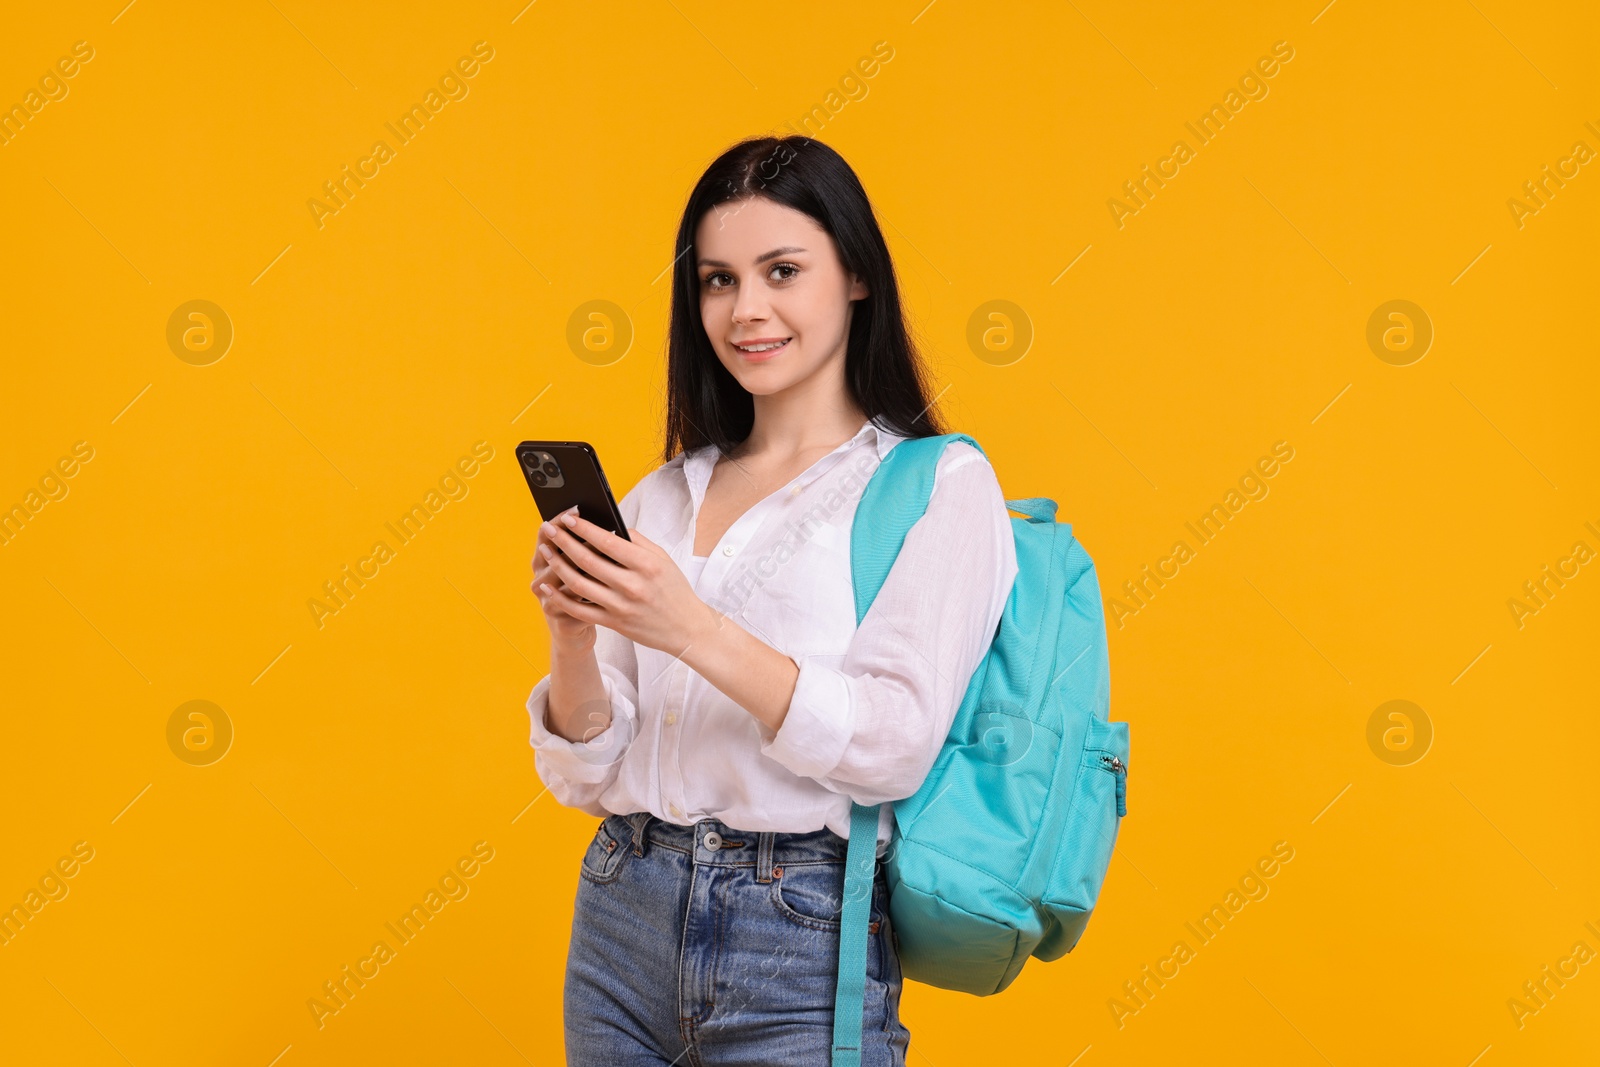 Photo of Smiling student with smartphone on yellow background